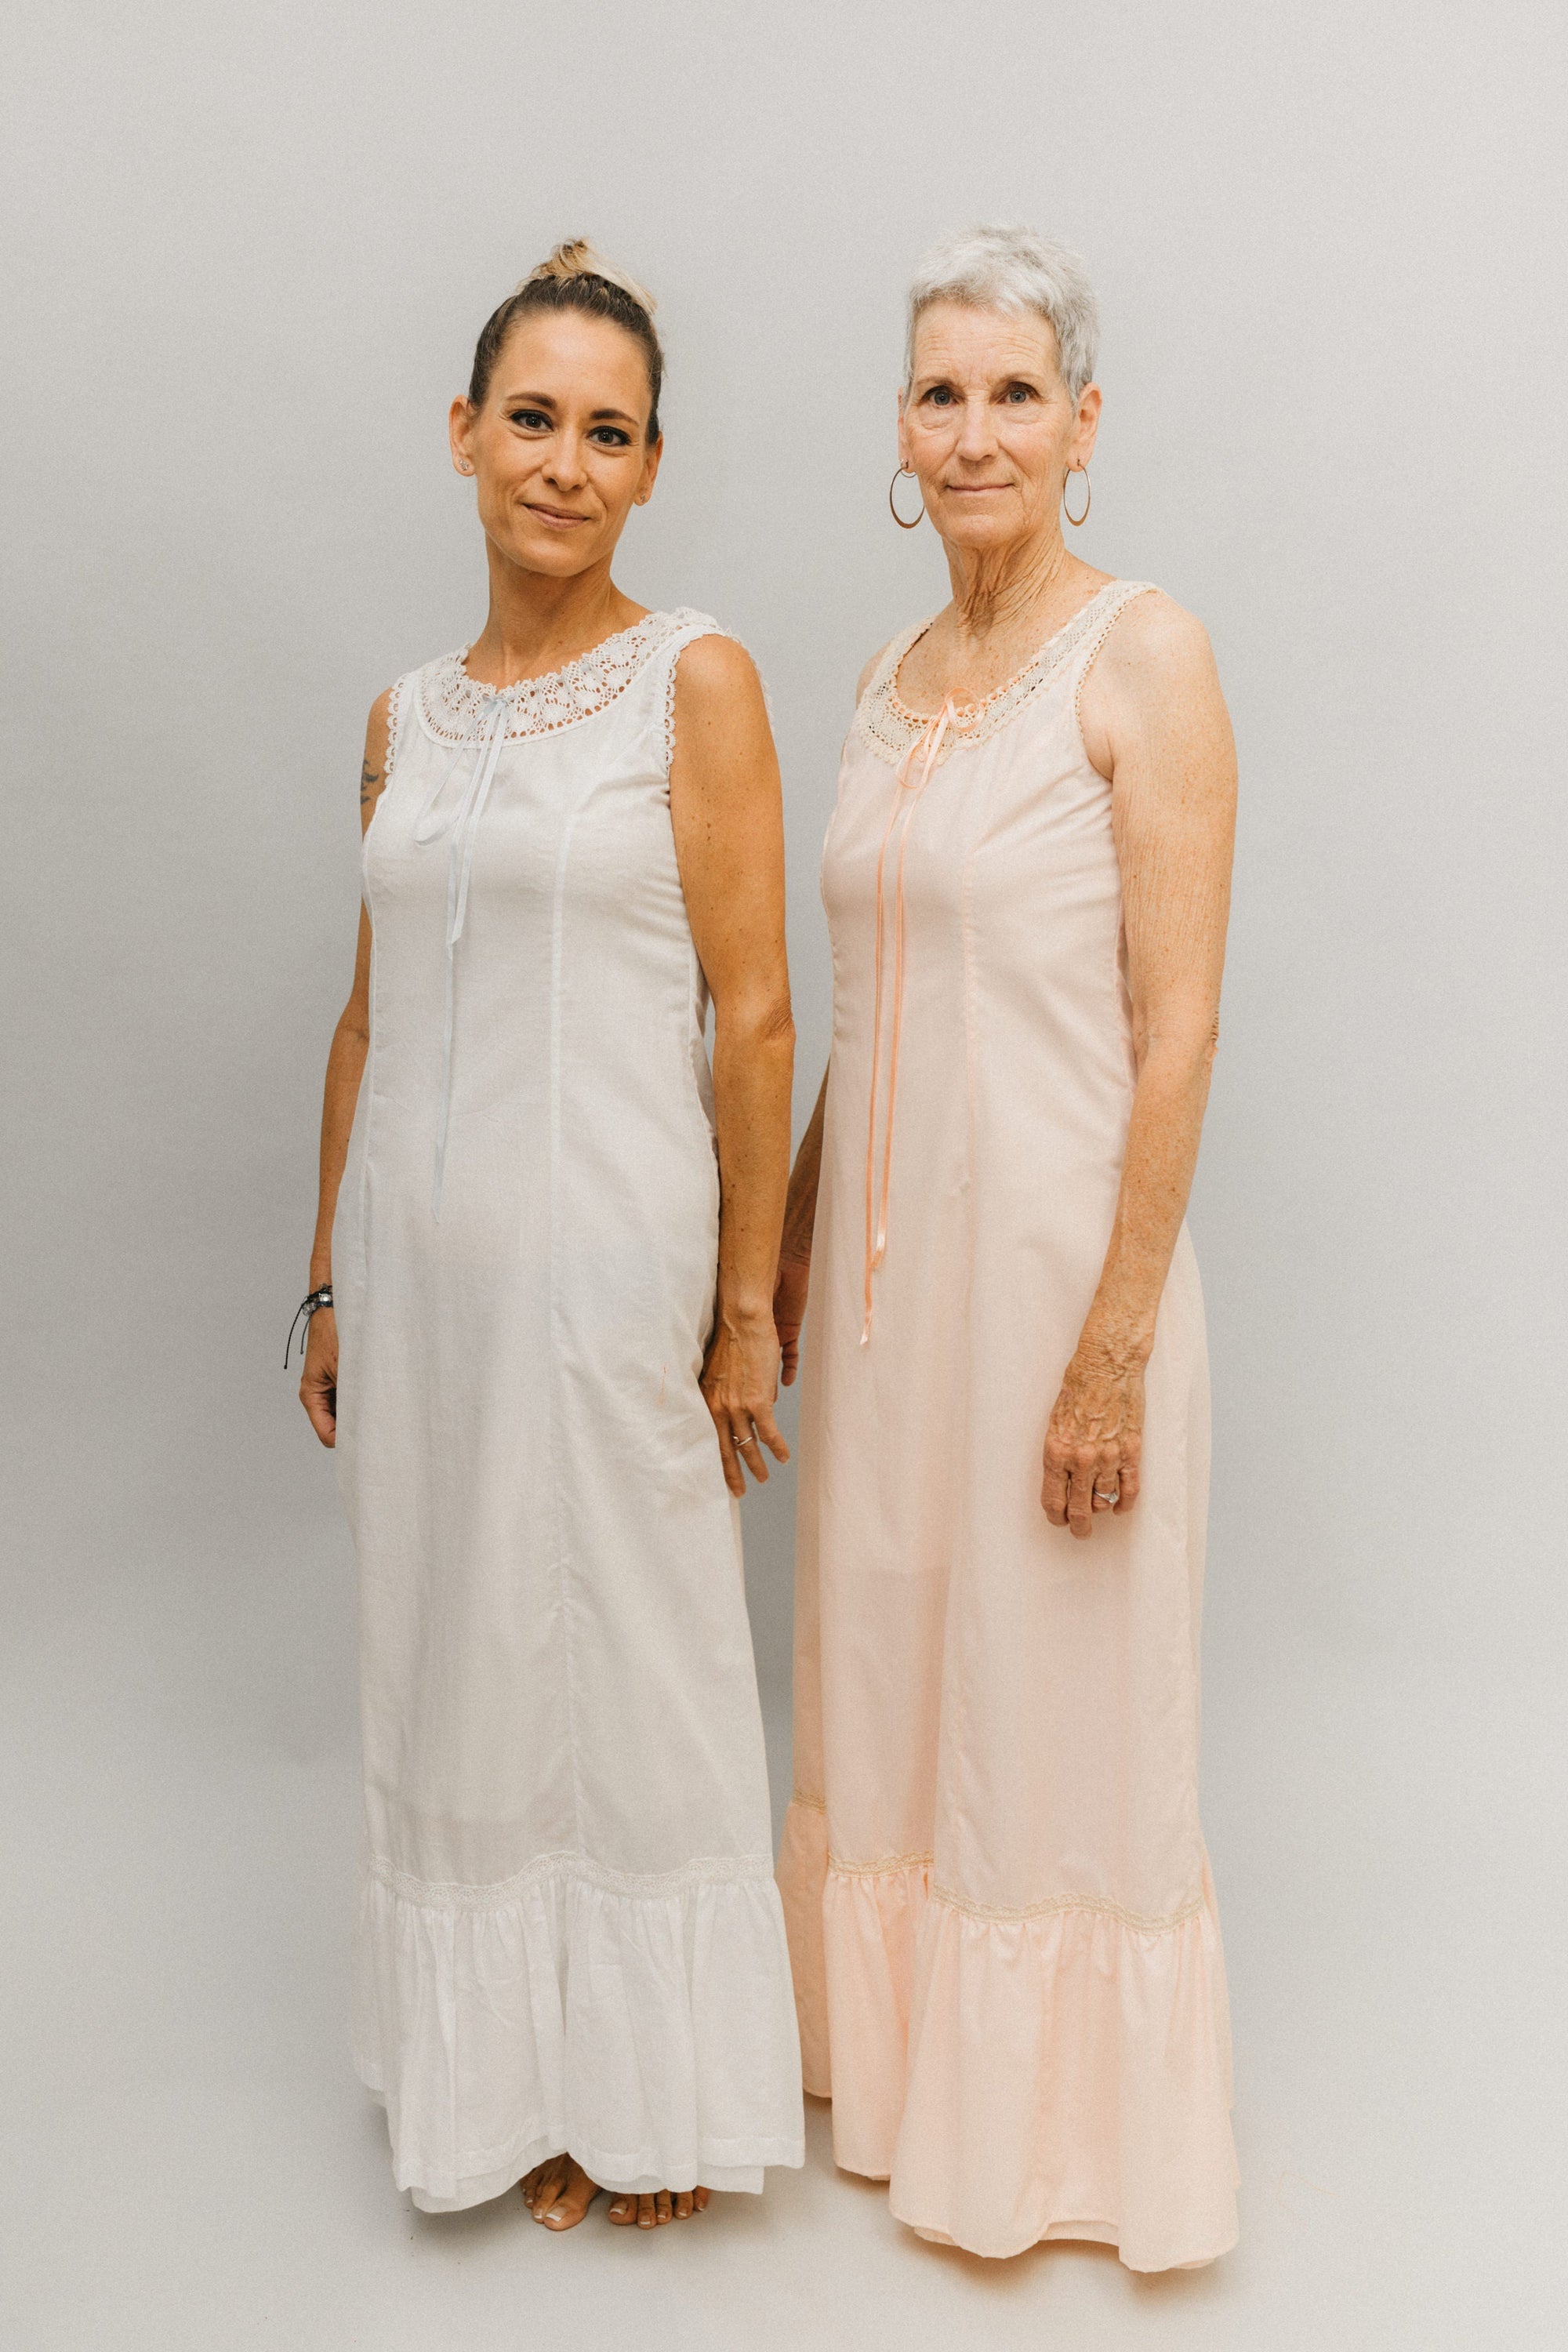 Two women wearing floor length princess slips with lace at the necklines.  Slip on right is light peach, slip on left is white.